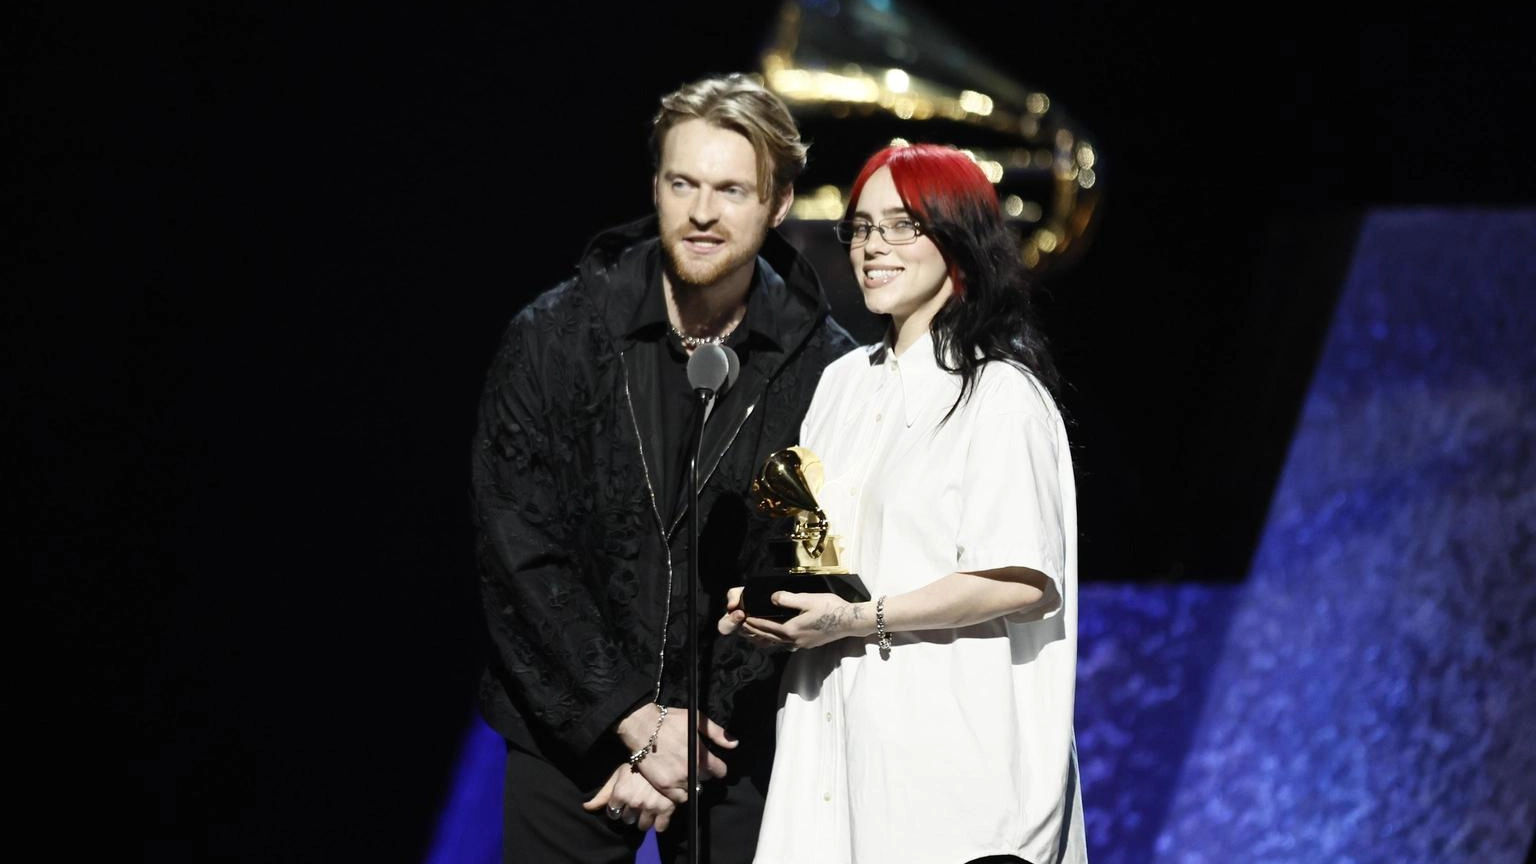 Grammy, What was I made for? miglior canzone dell'anno